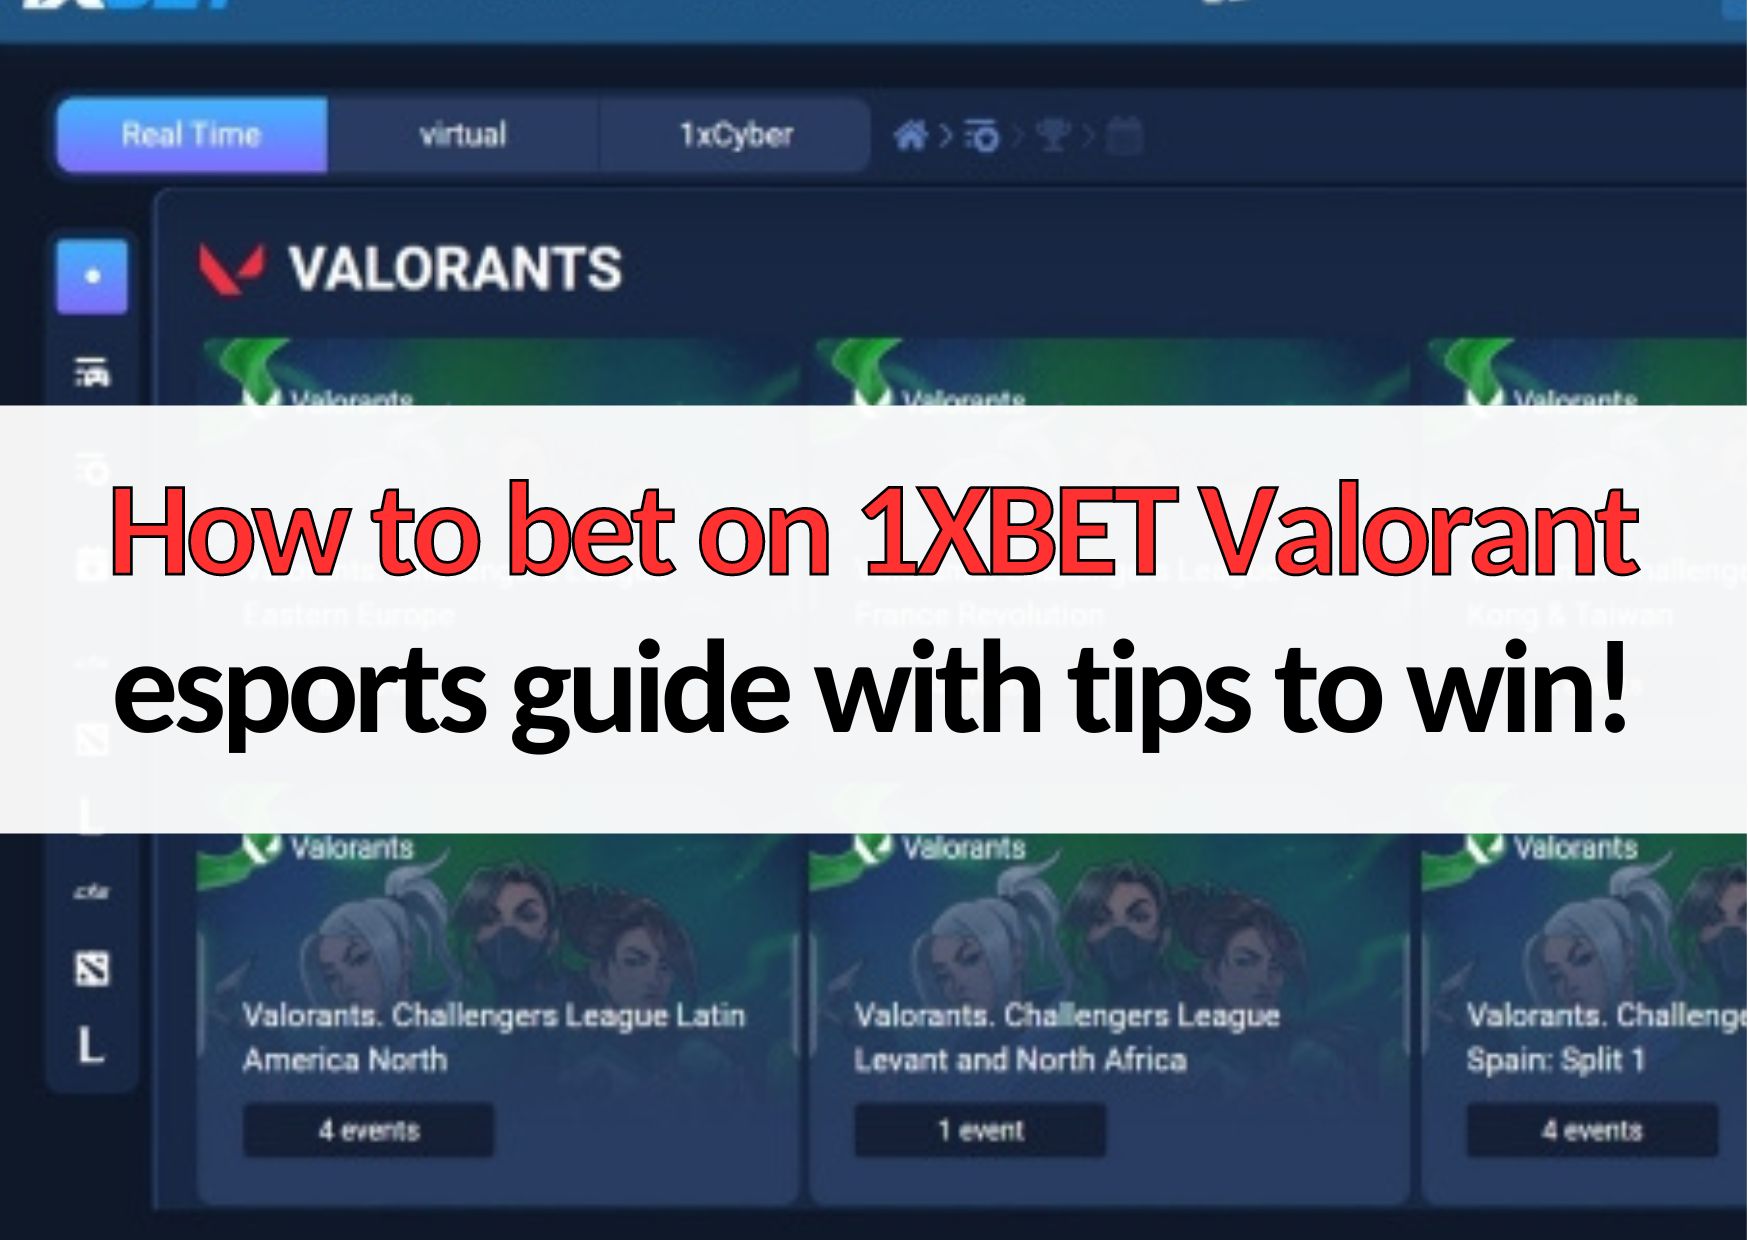 how to bet on 1xbet valorant esports guide with tips to win